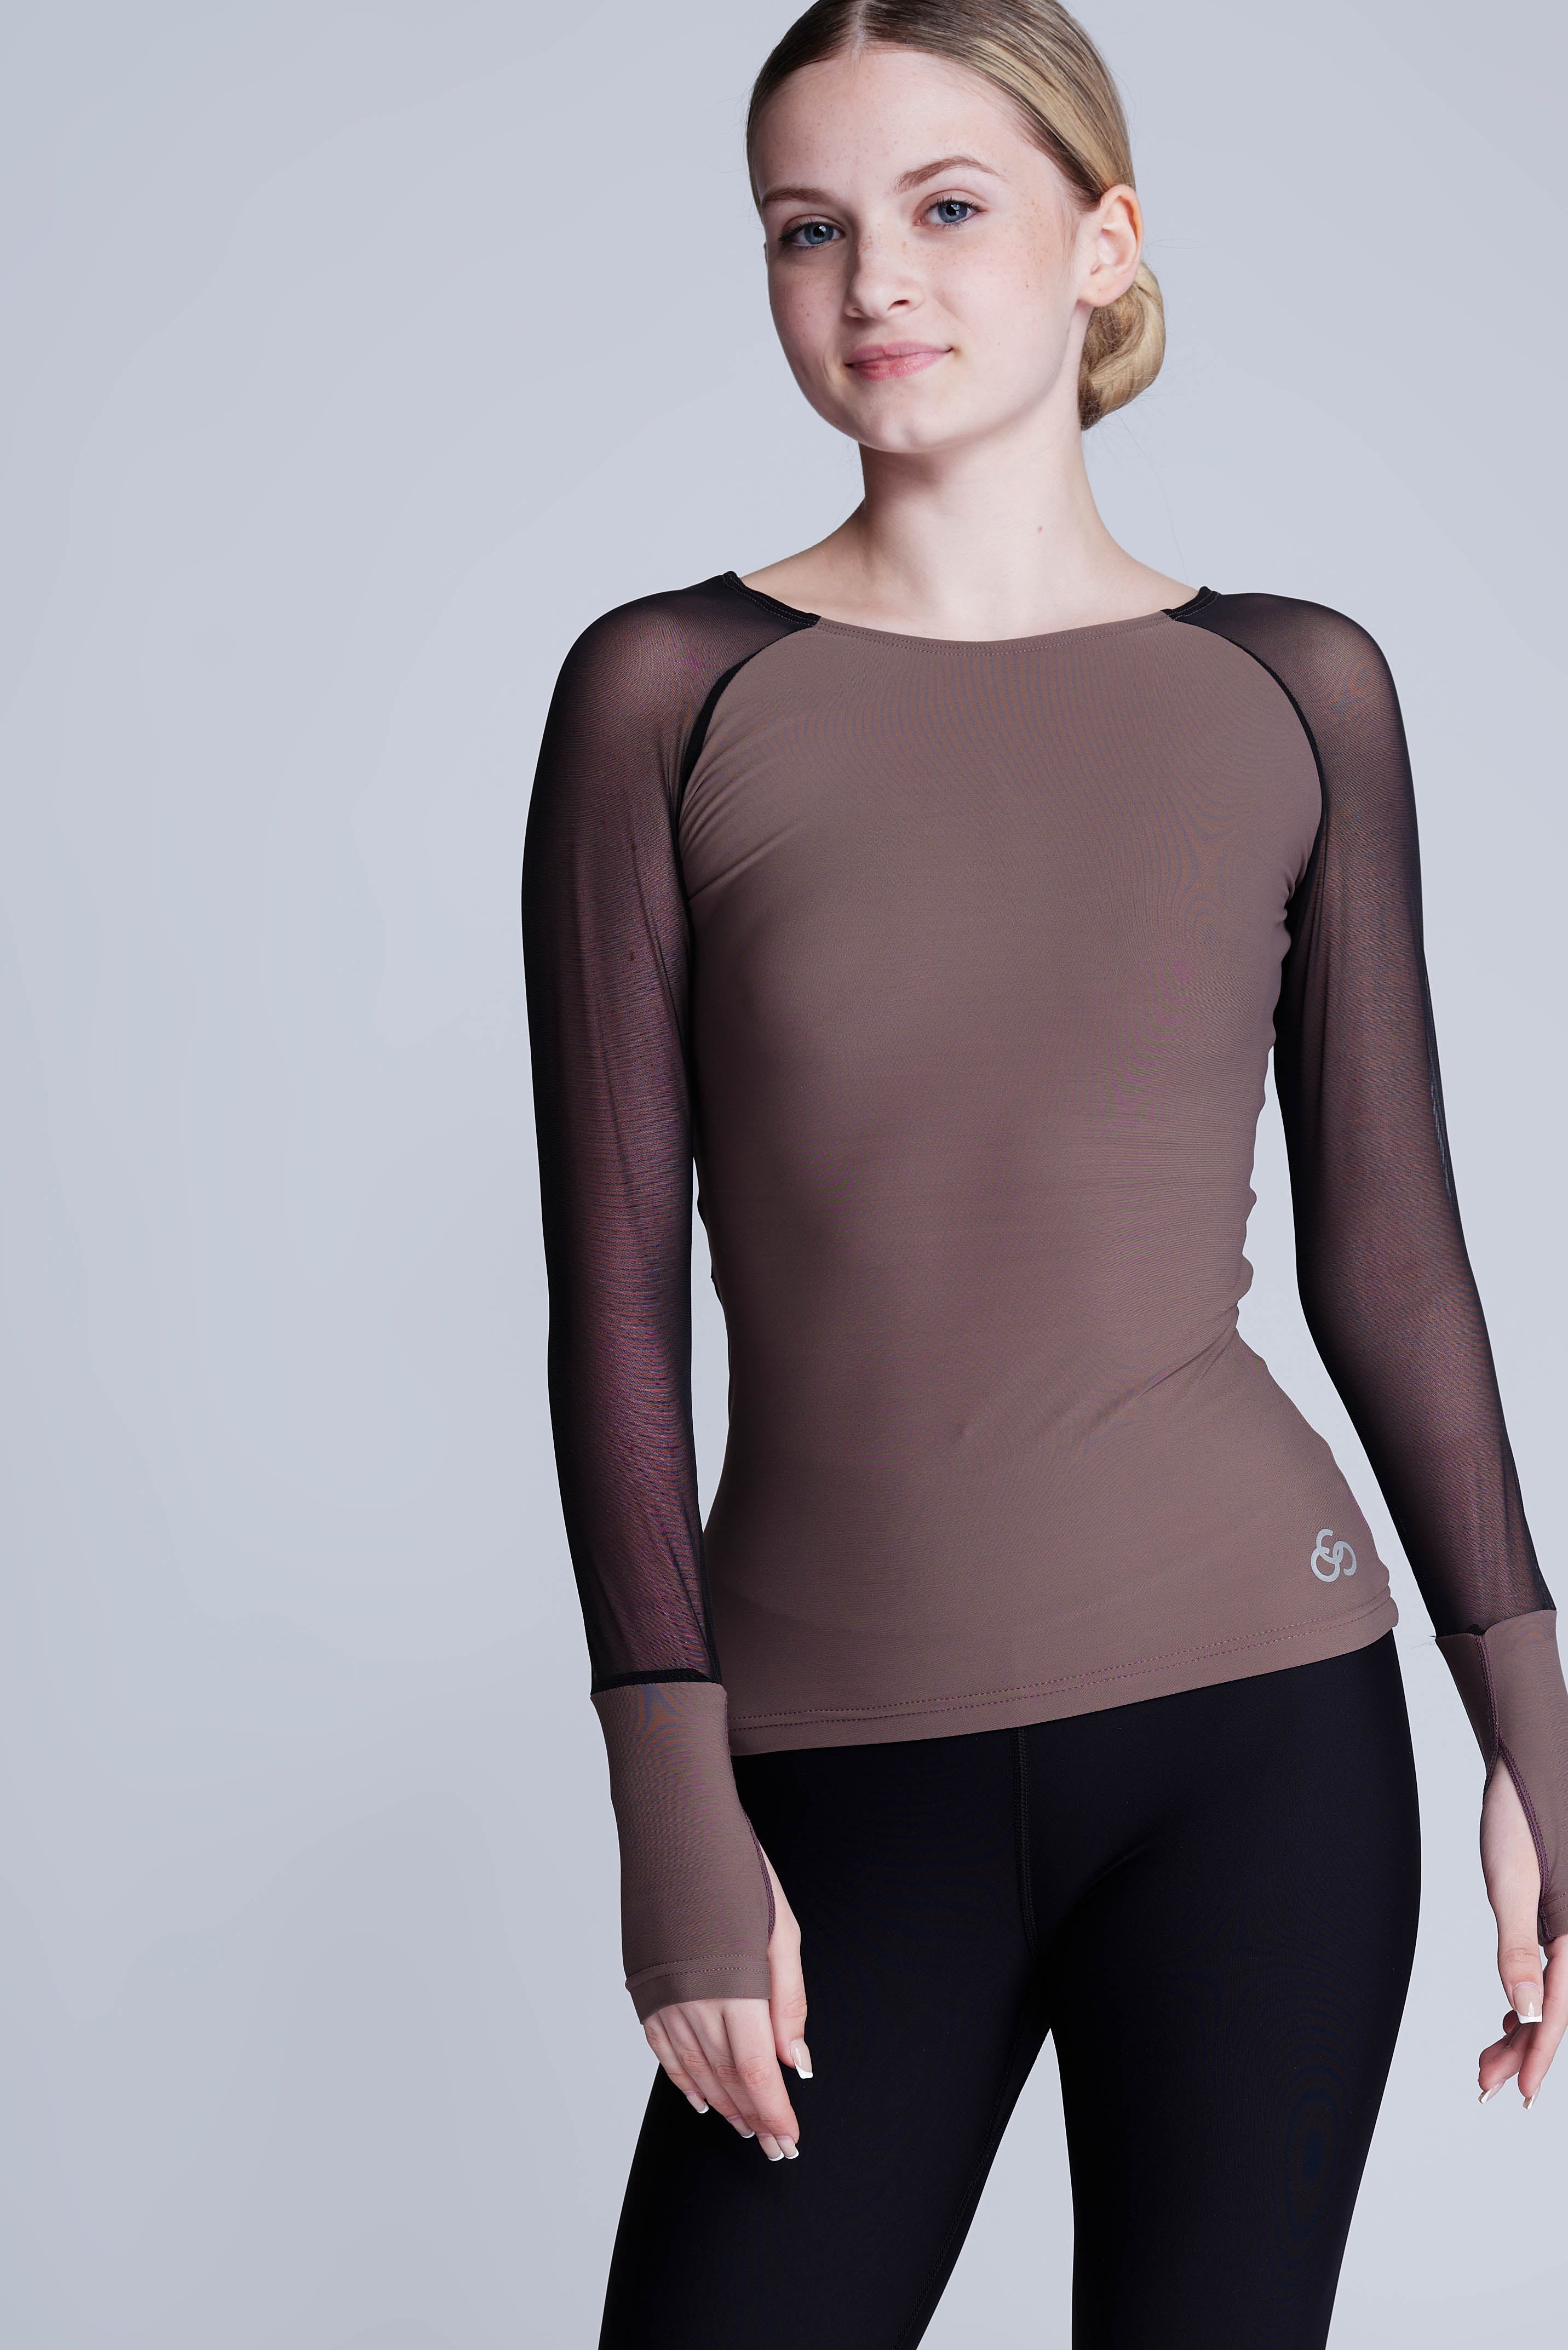 Girl's Figure Skating Ignite Long sleeve Top in Taupe